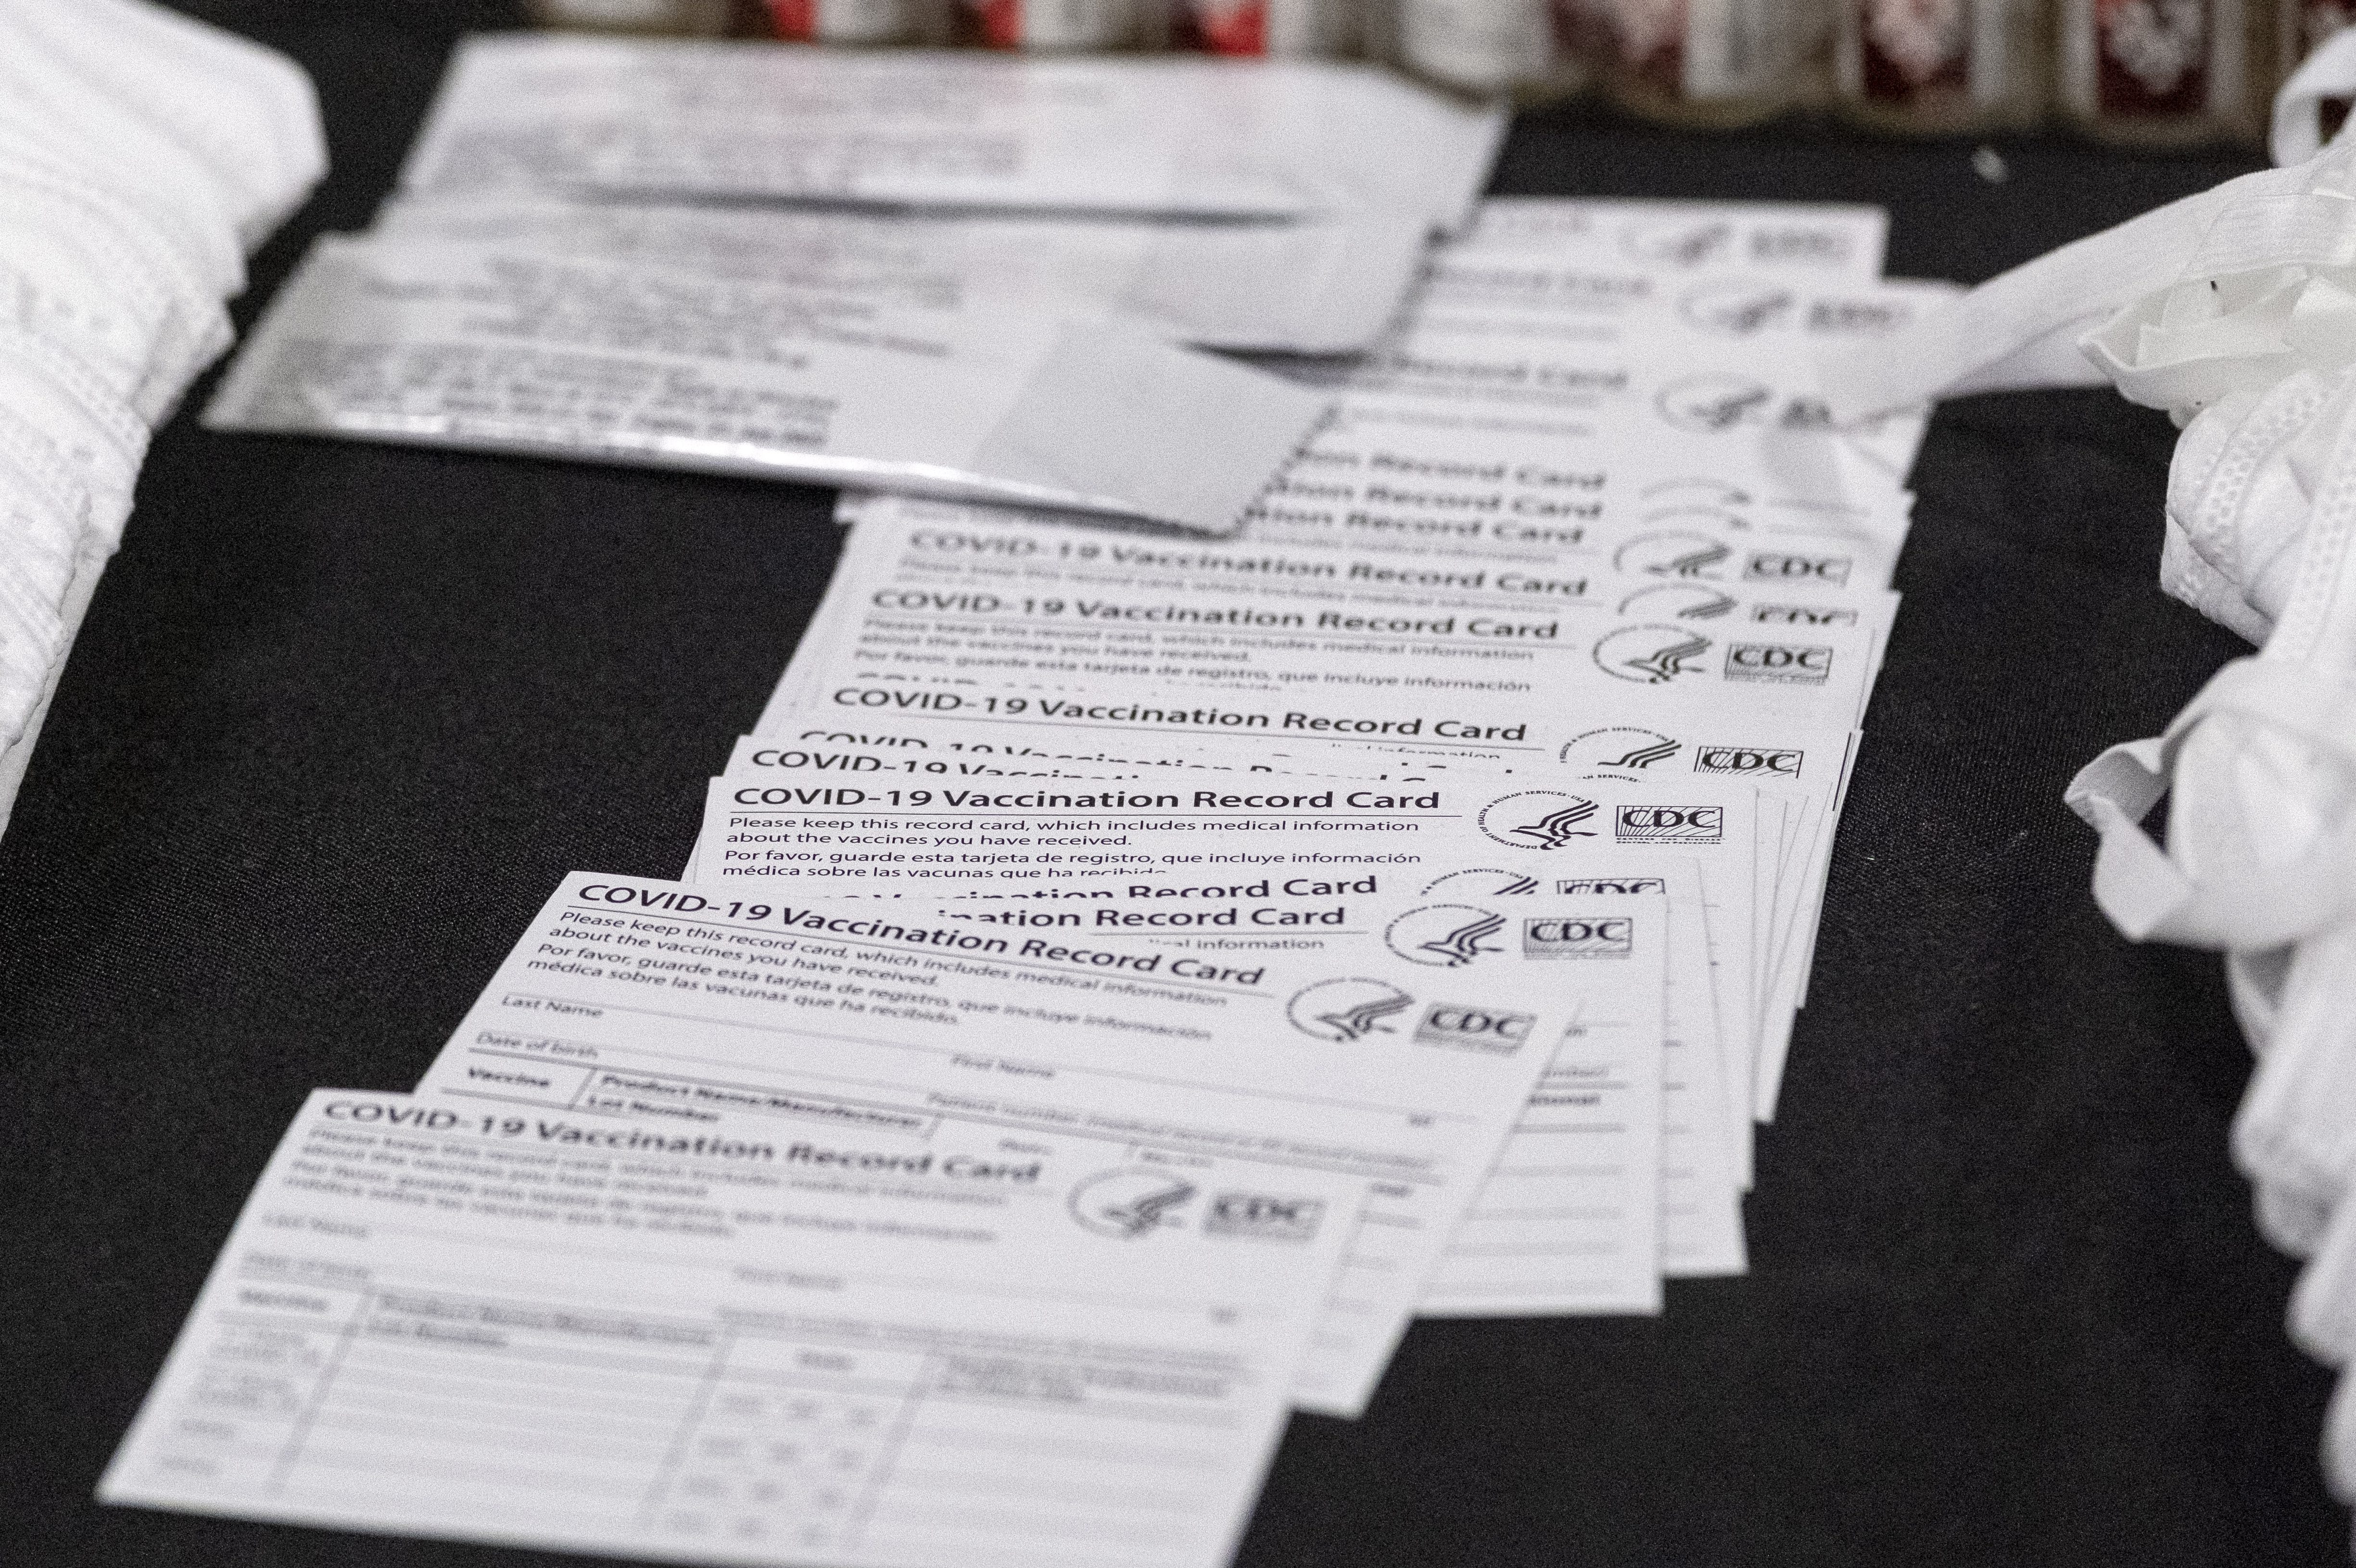 U.S. Customs and Border Protection puts seized counterfeit Covid-19 vaccination cards on display.